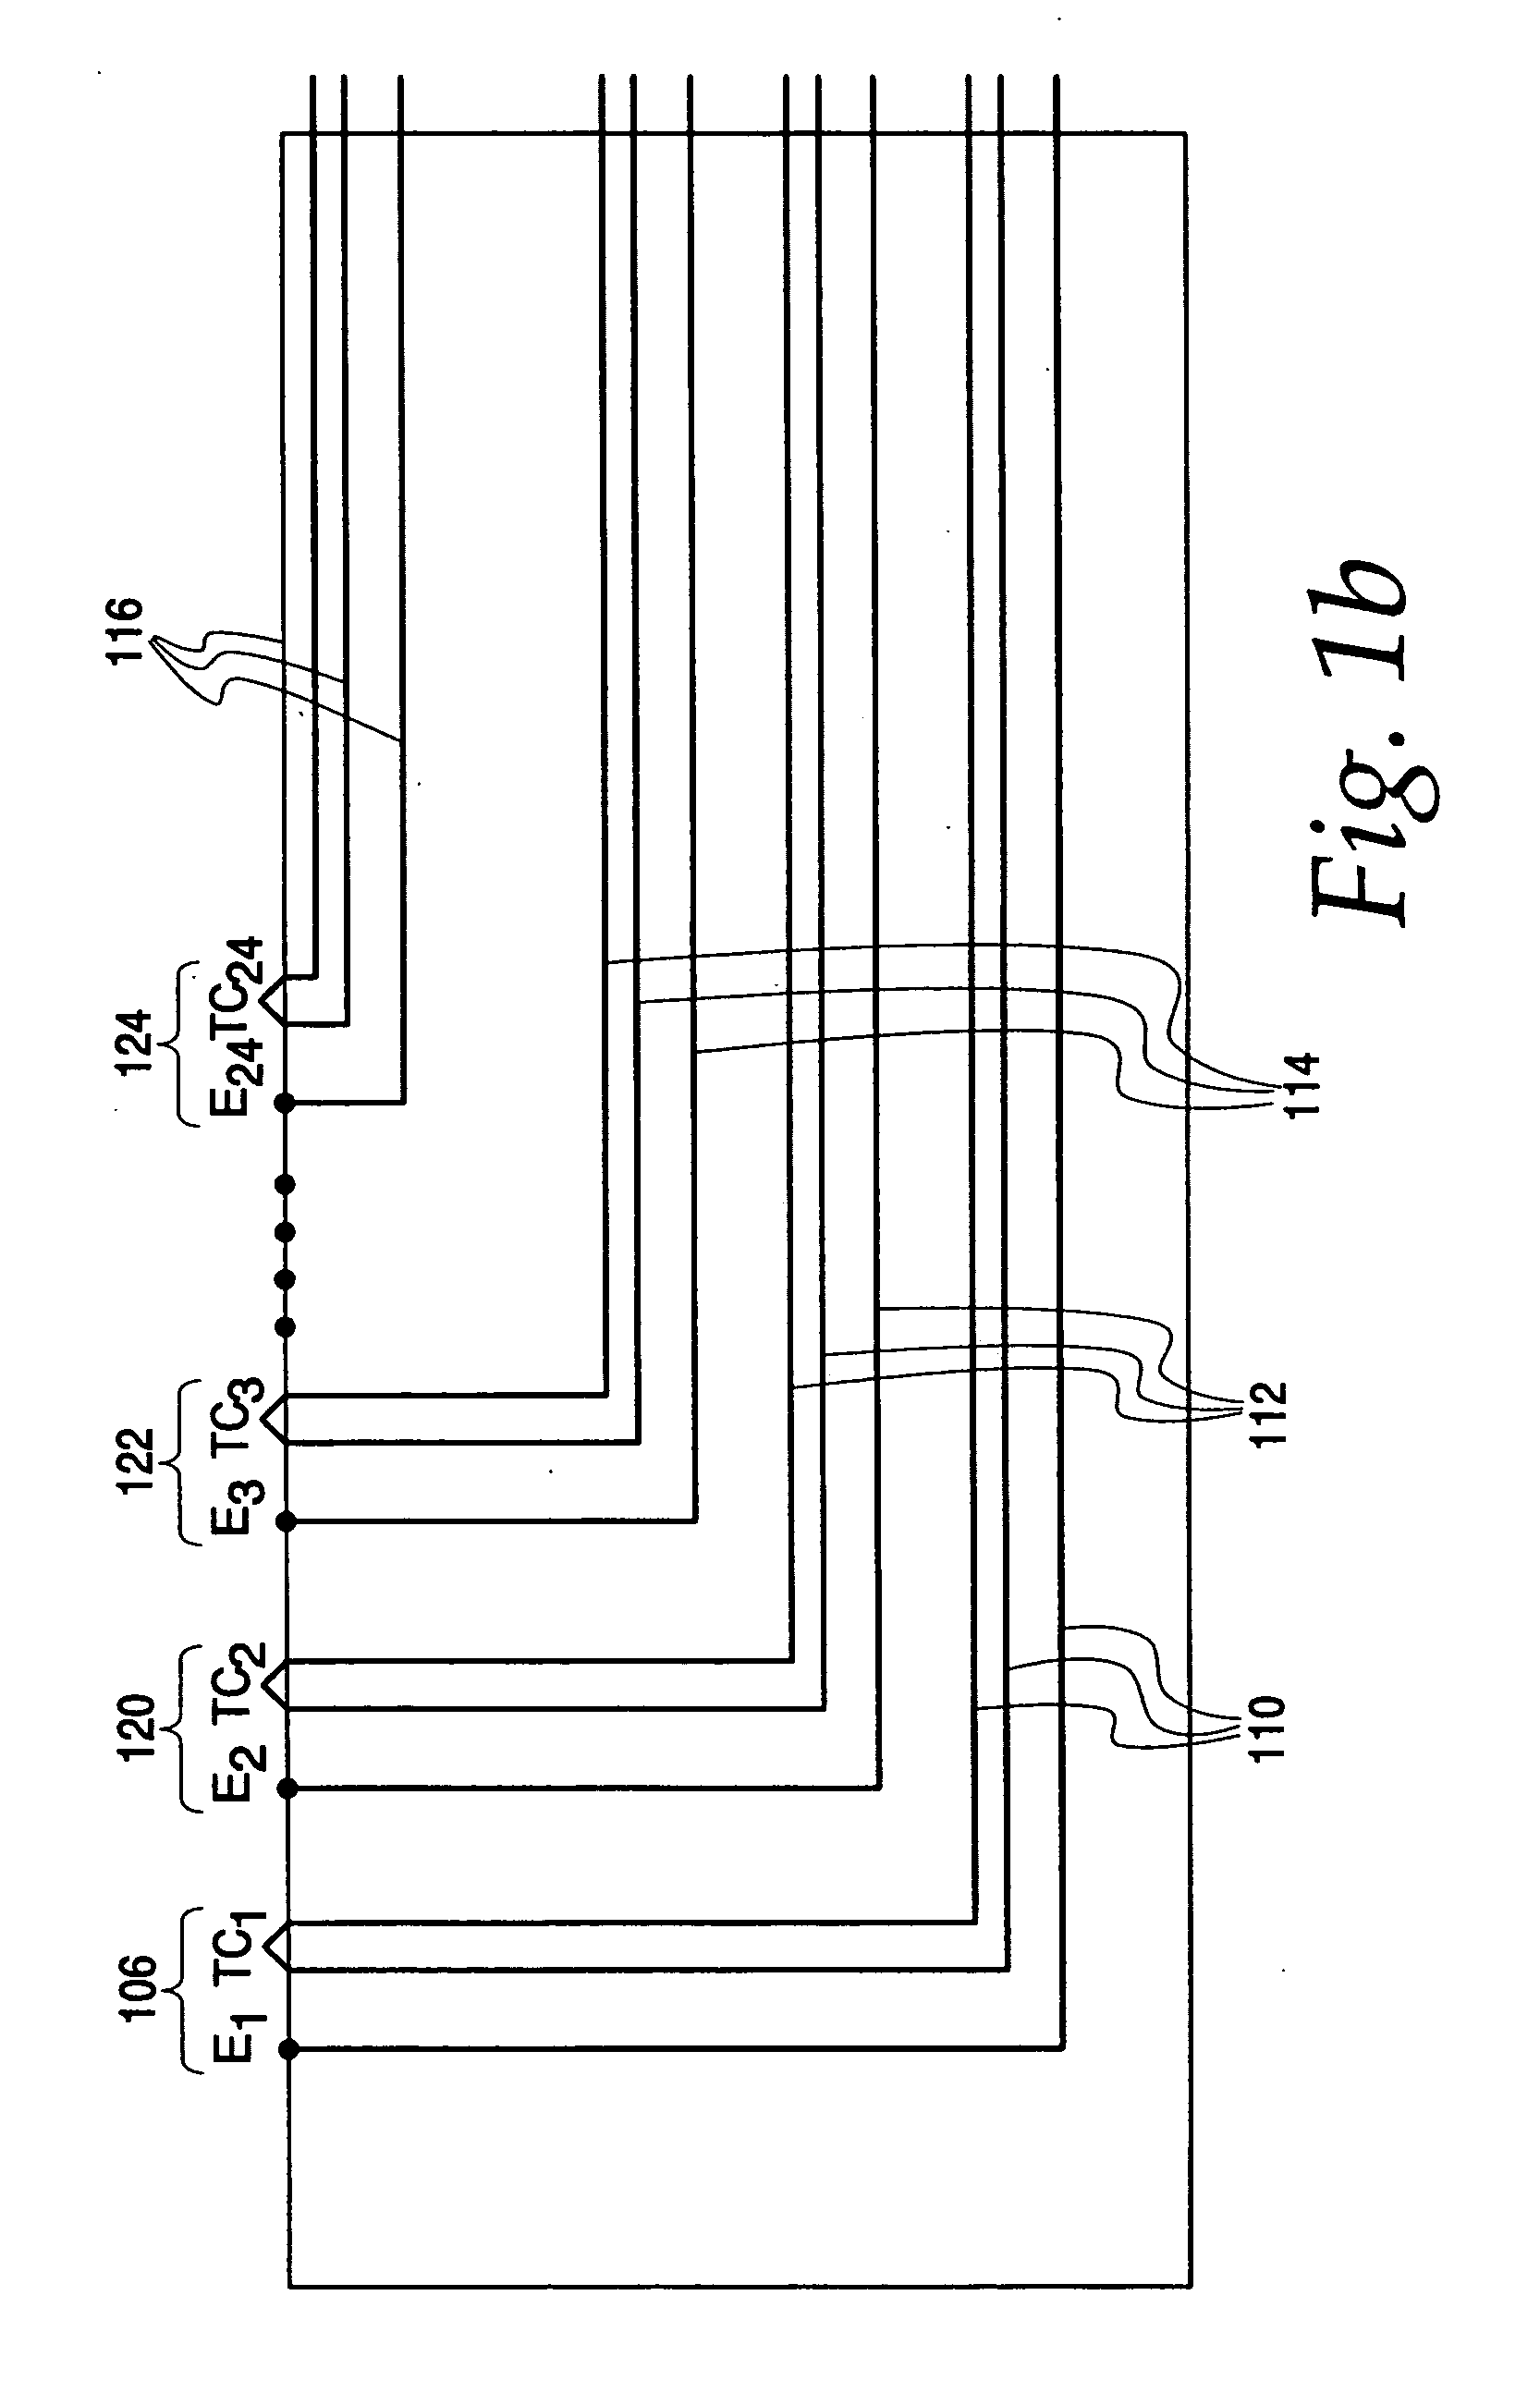 System and method for performing ablation and other medical procedures using an electrode array with flex circuit